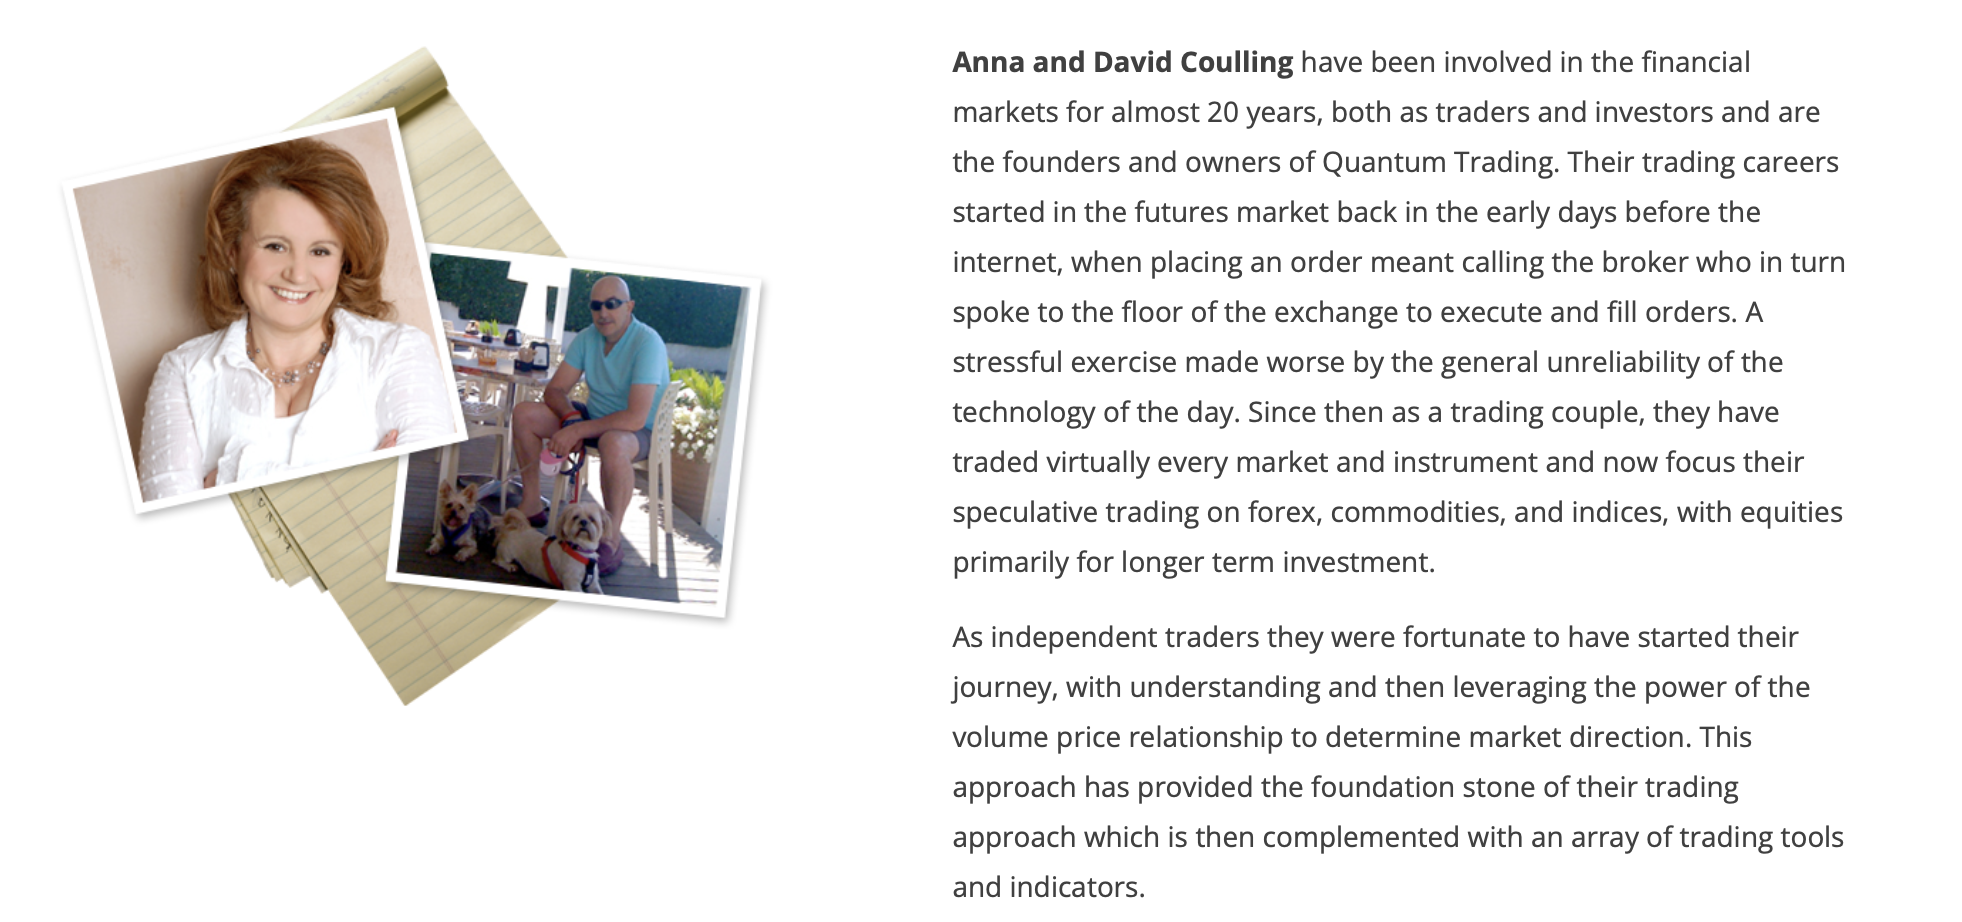 The founders of Quantum trading